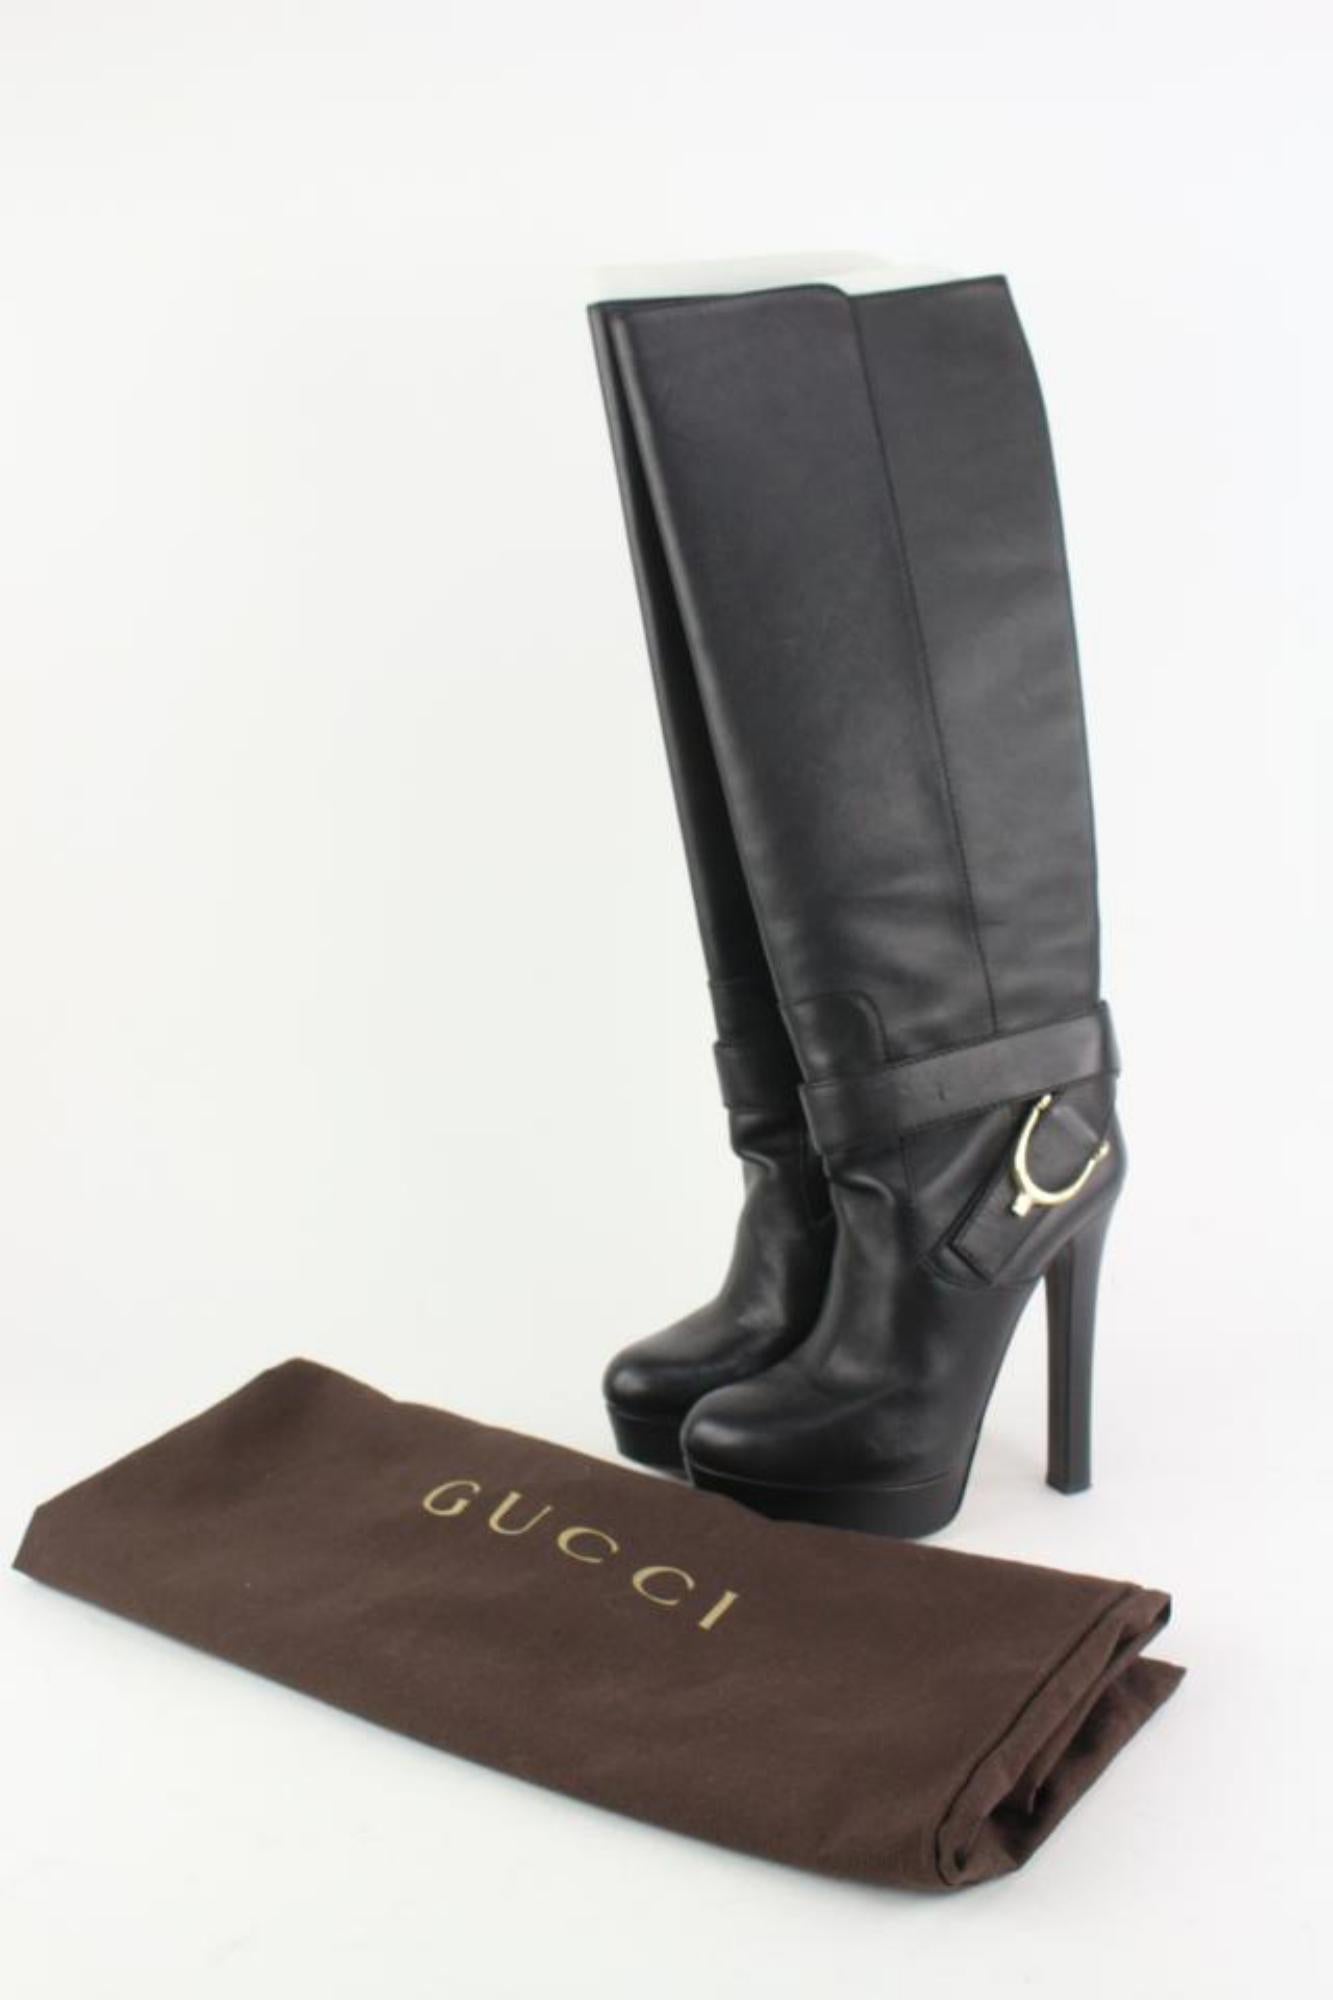 Gucci Women's 35.5 Black Leather Horsebit Boots 1gg1105 For Sale 9